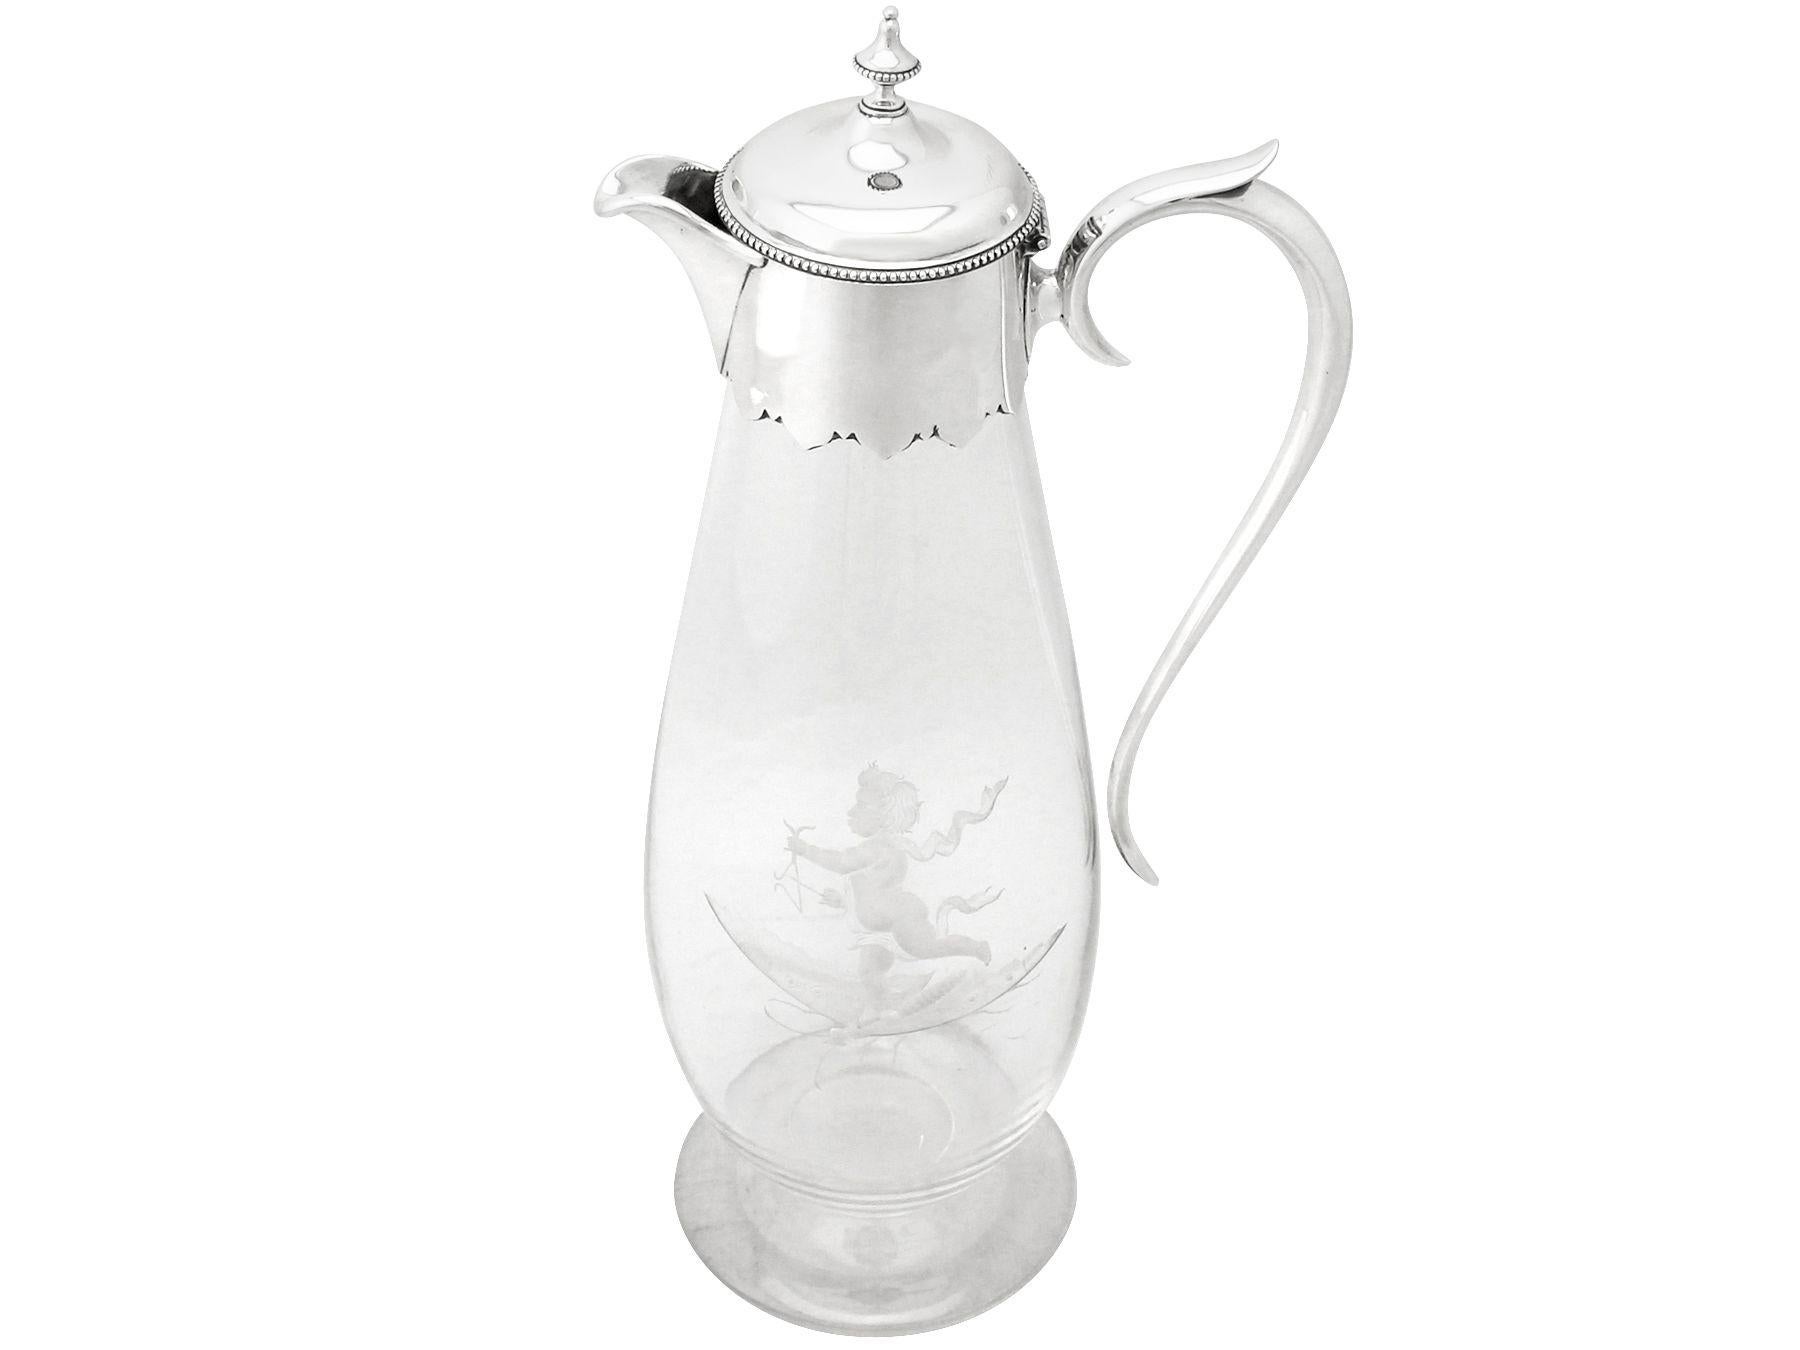 An exceptional, fine and impressive antique Victorian glass and silver mounted claret jug; part of our silver mounted glass collection.

This exceptional antique Victorian glass and sterling silver and glass claret jug has a circular rounded form